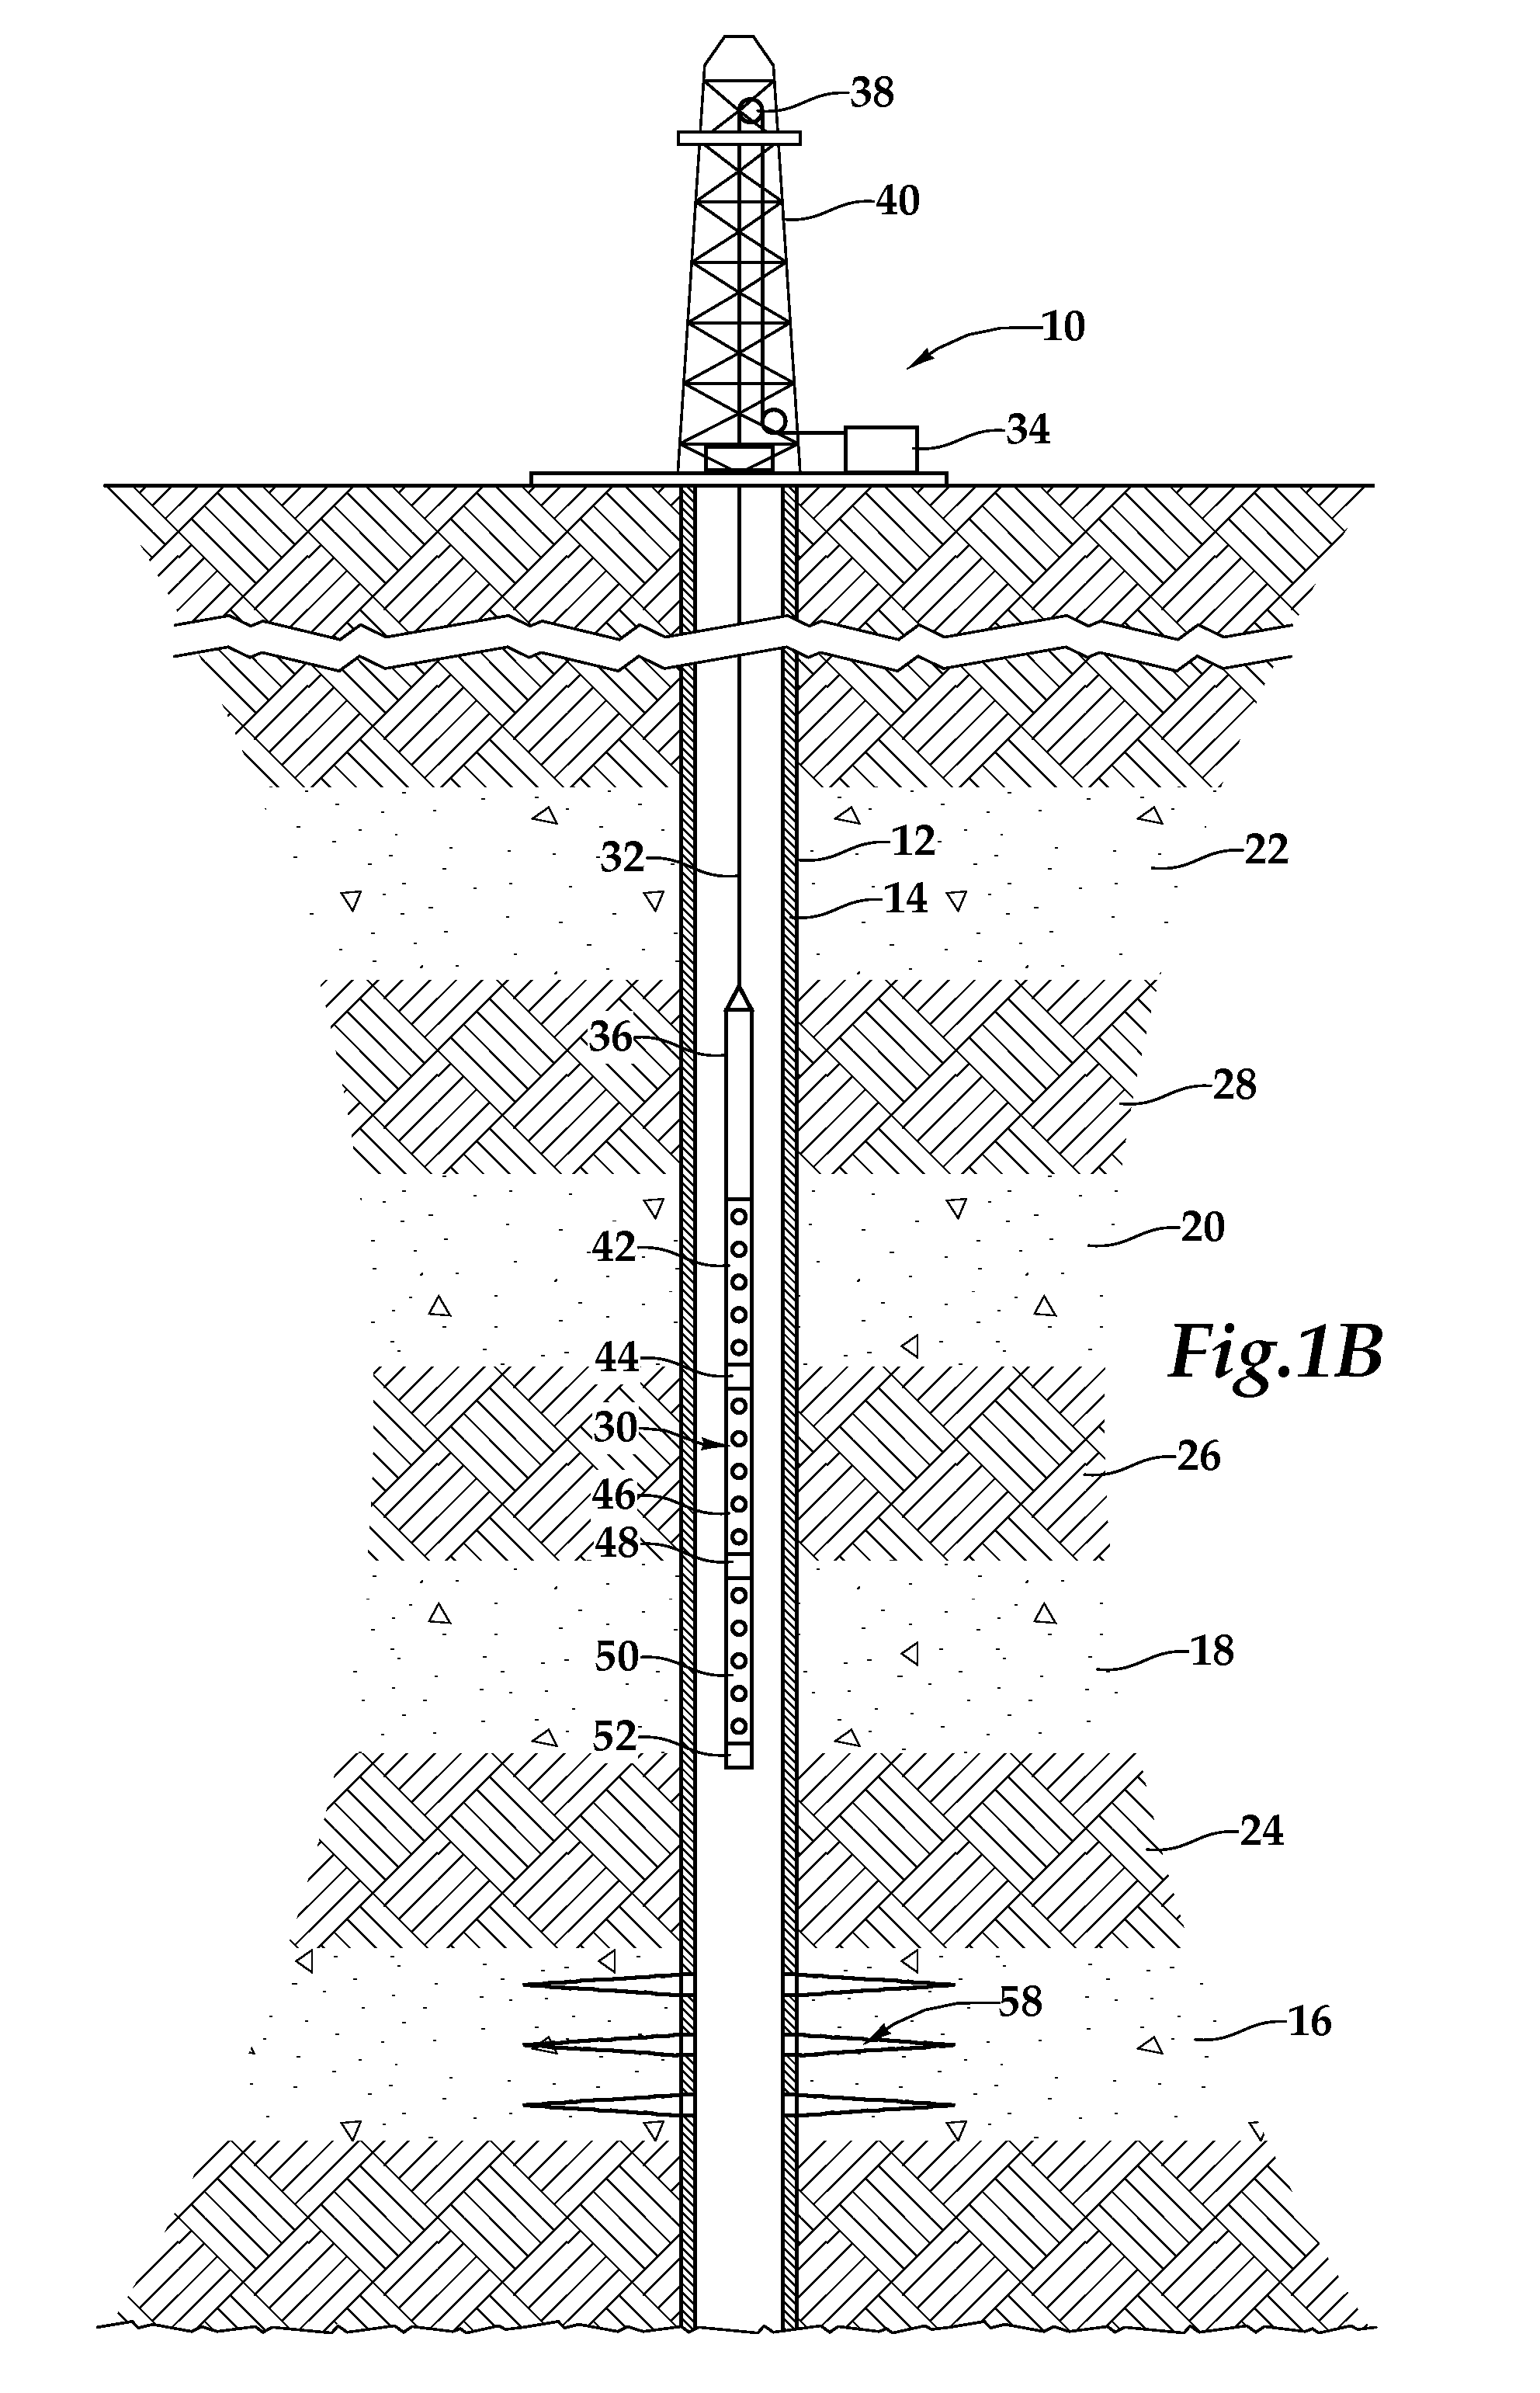 Method for selective activation of downhole devices in a tool string